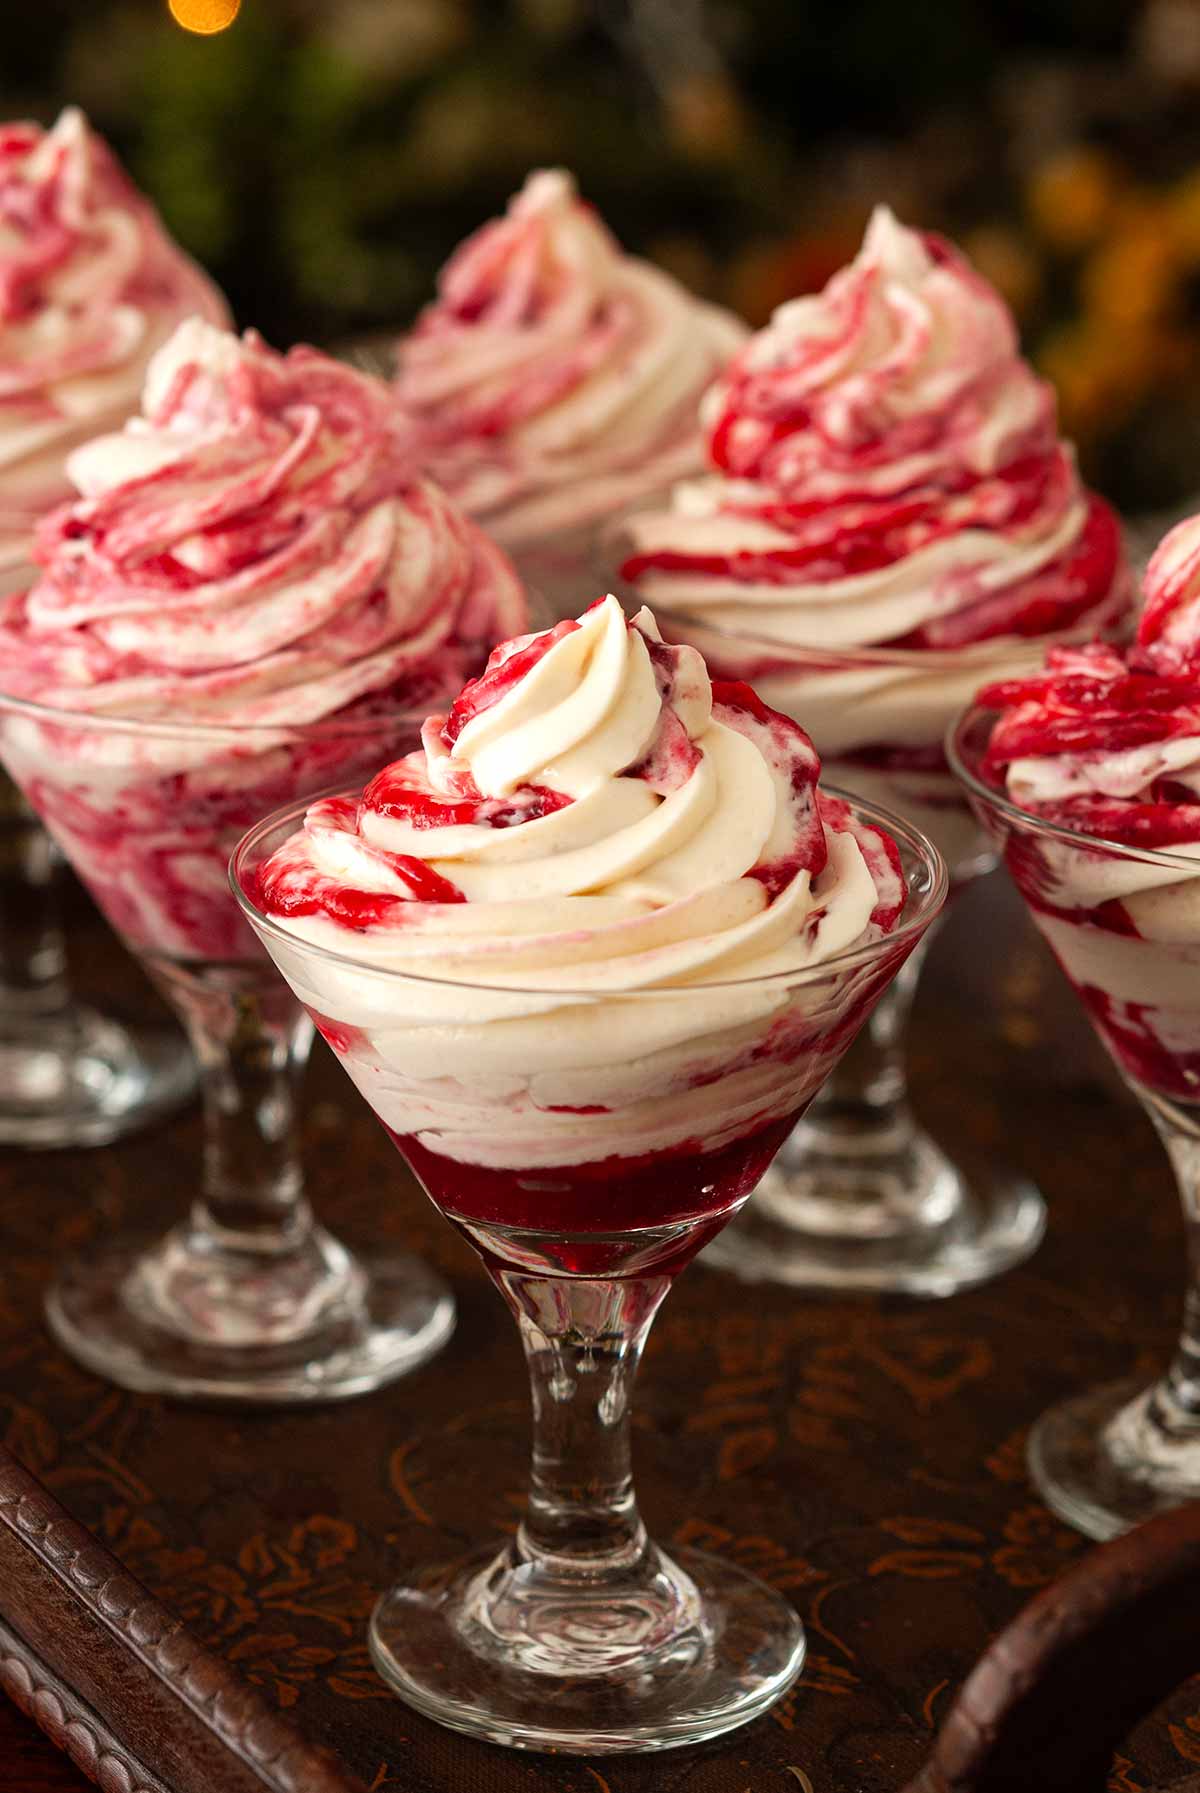 6 cheesecake mousse desserts on a tray in front of a christmas tree.